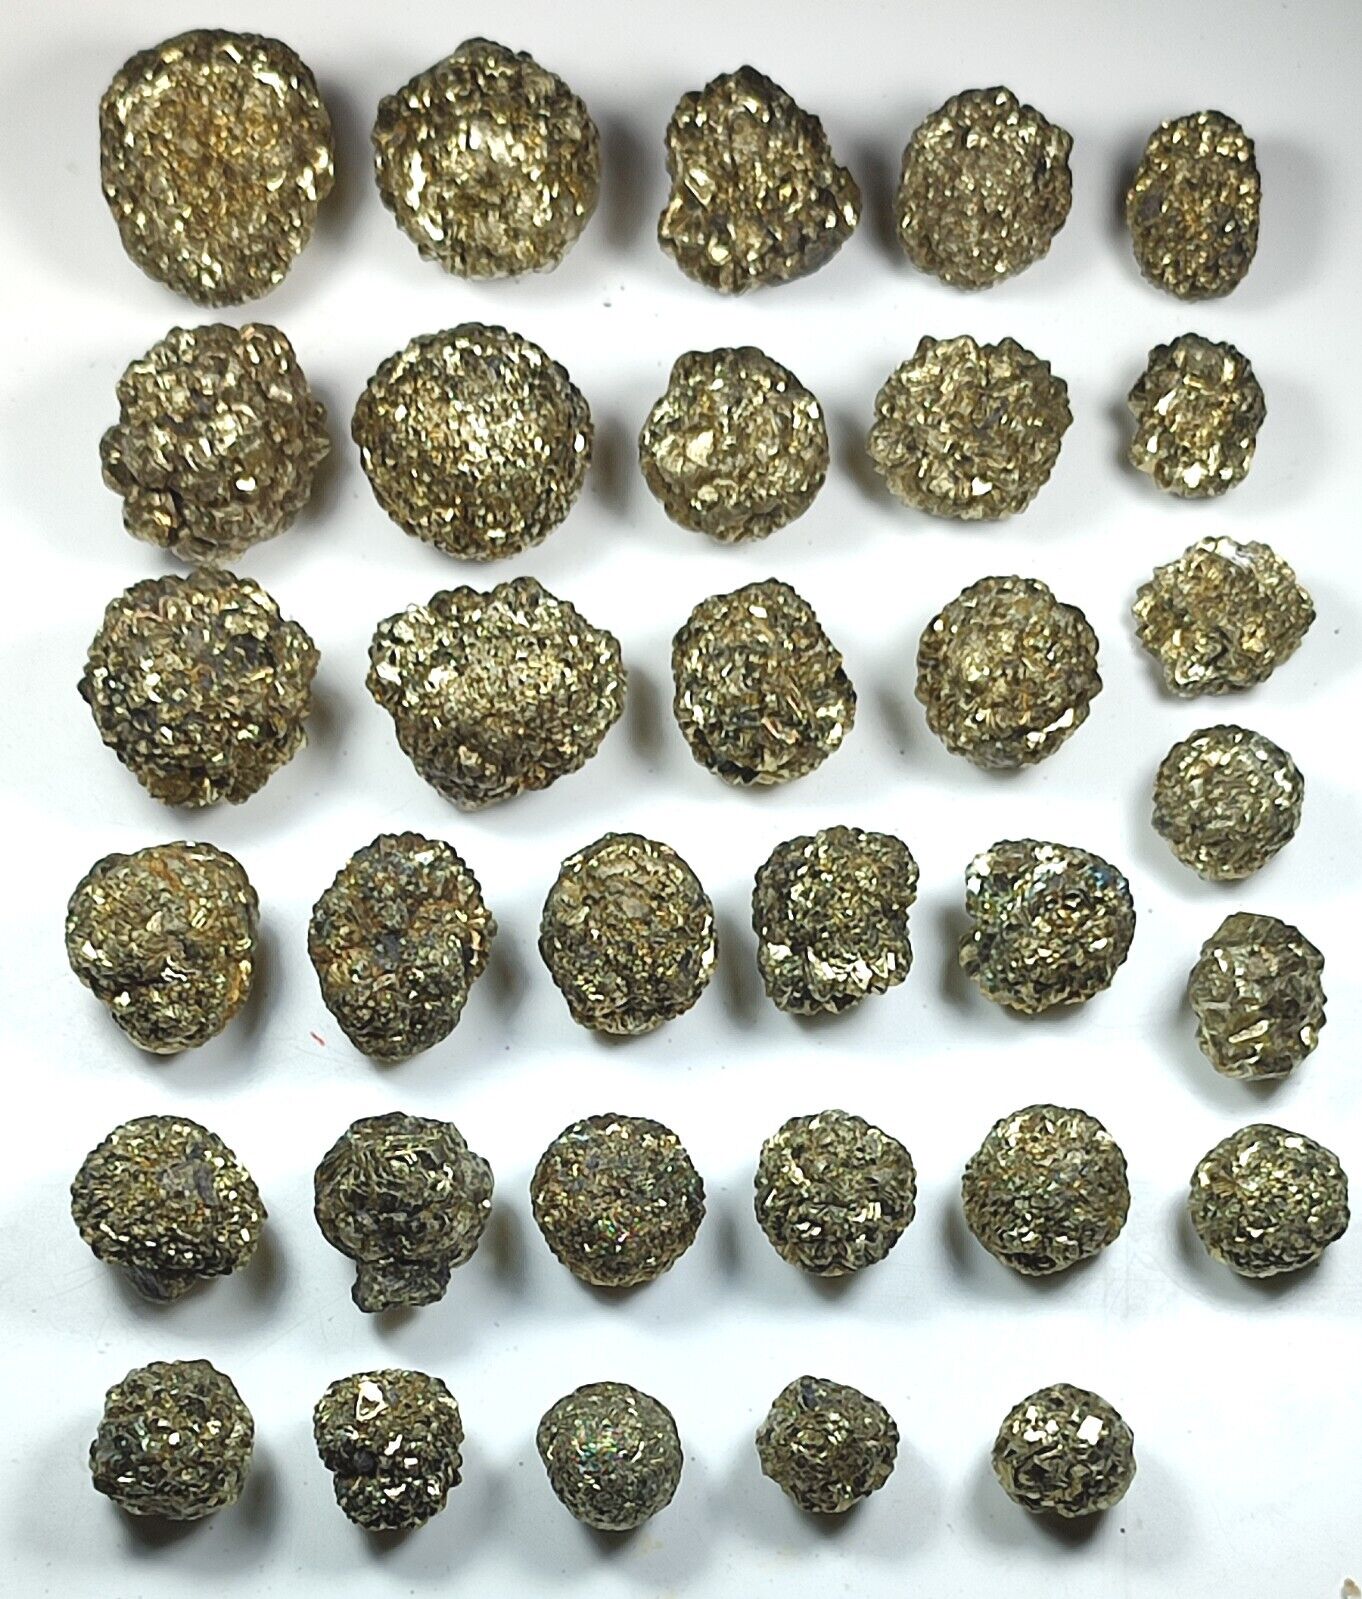 33 PCS NEW FIND Golden Marcasite/Pyrite Crystals with Star Formation- Pakistan 